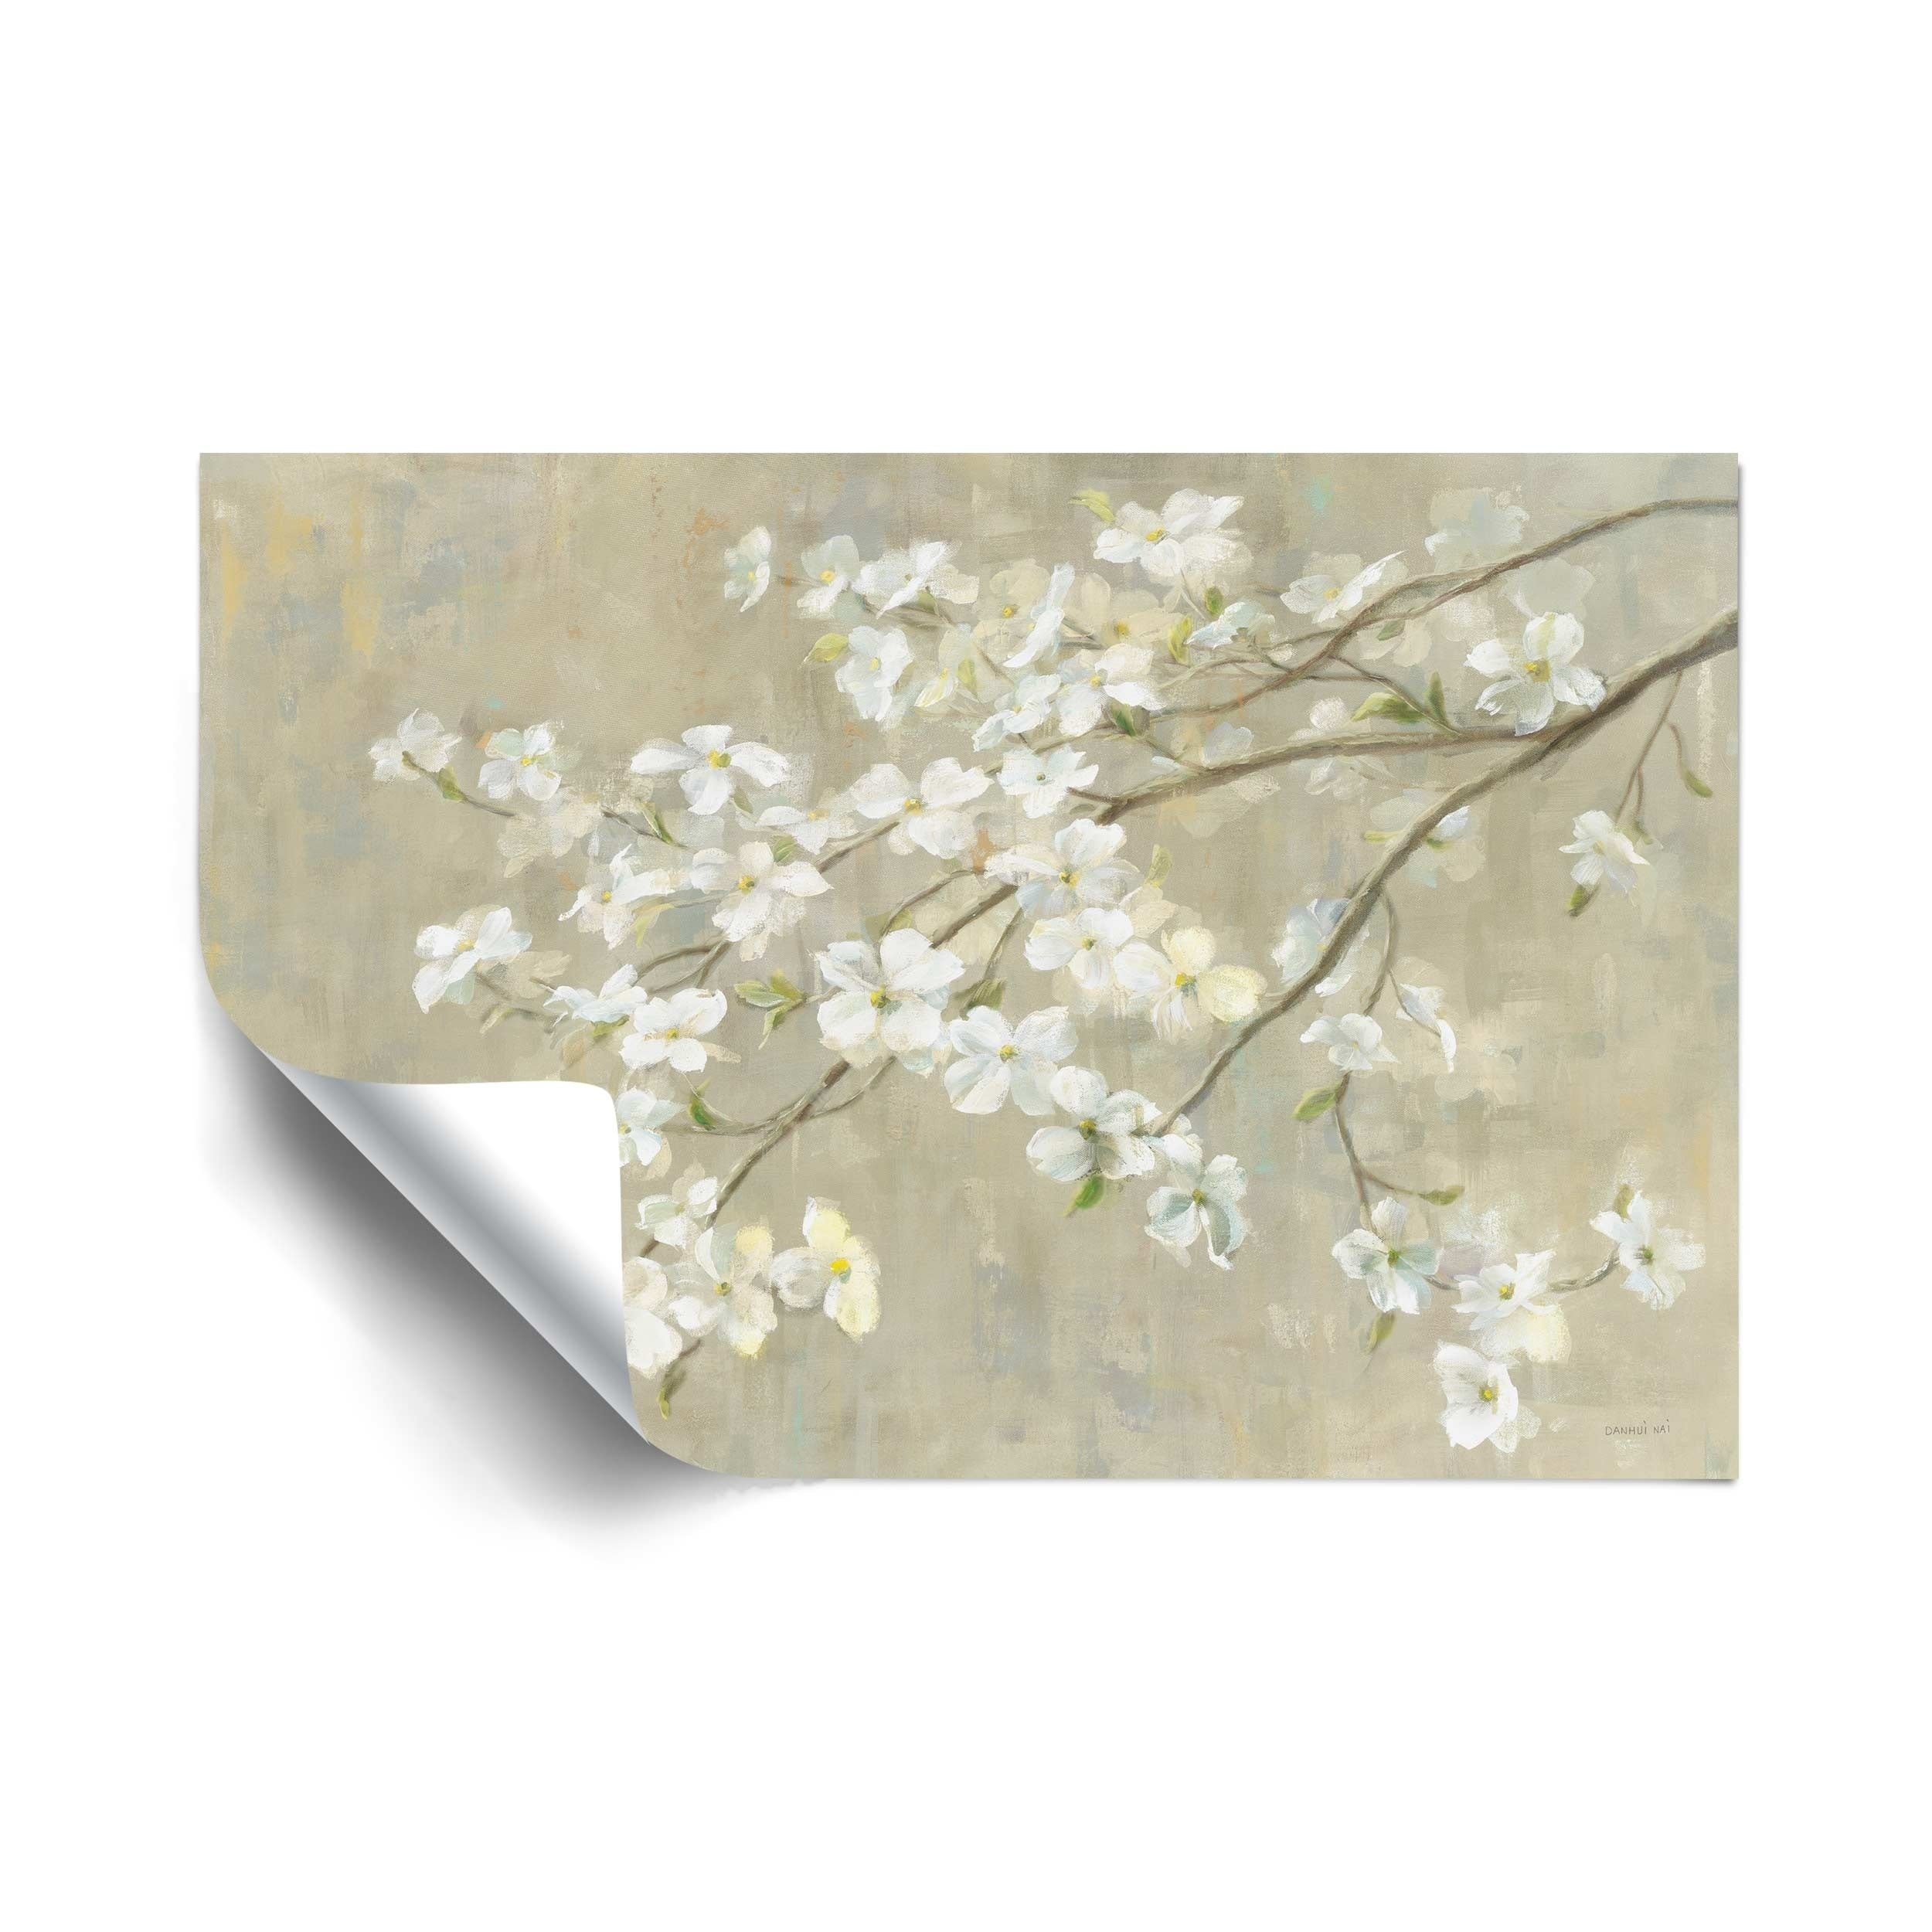 Shop Artwall Dogwood In Spring Neutral Crop Removable Wall Art Mural Overstock 28242475